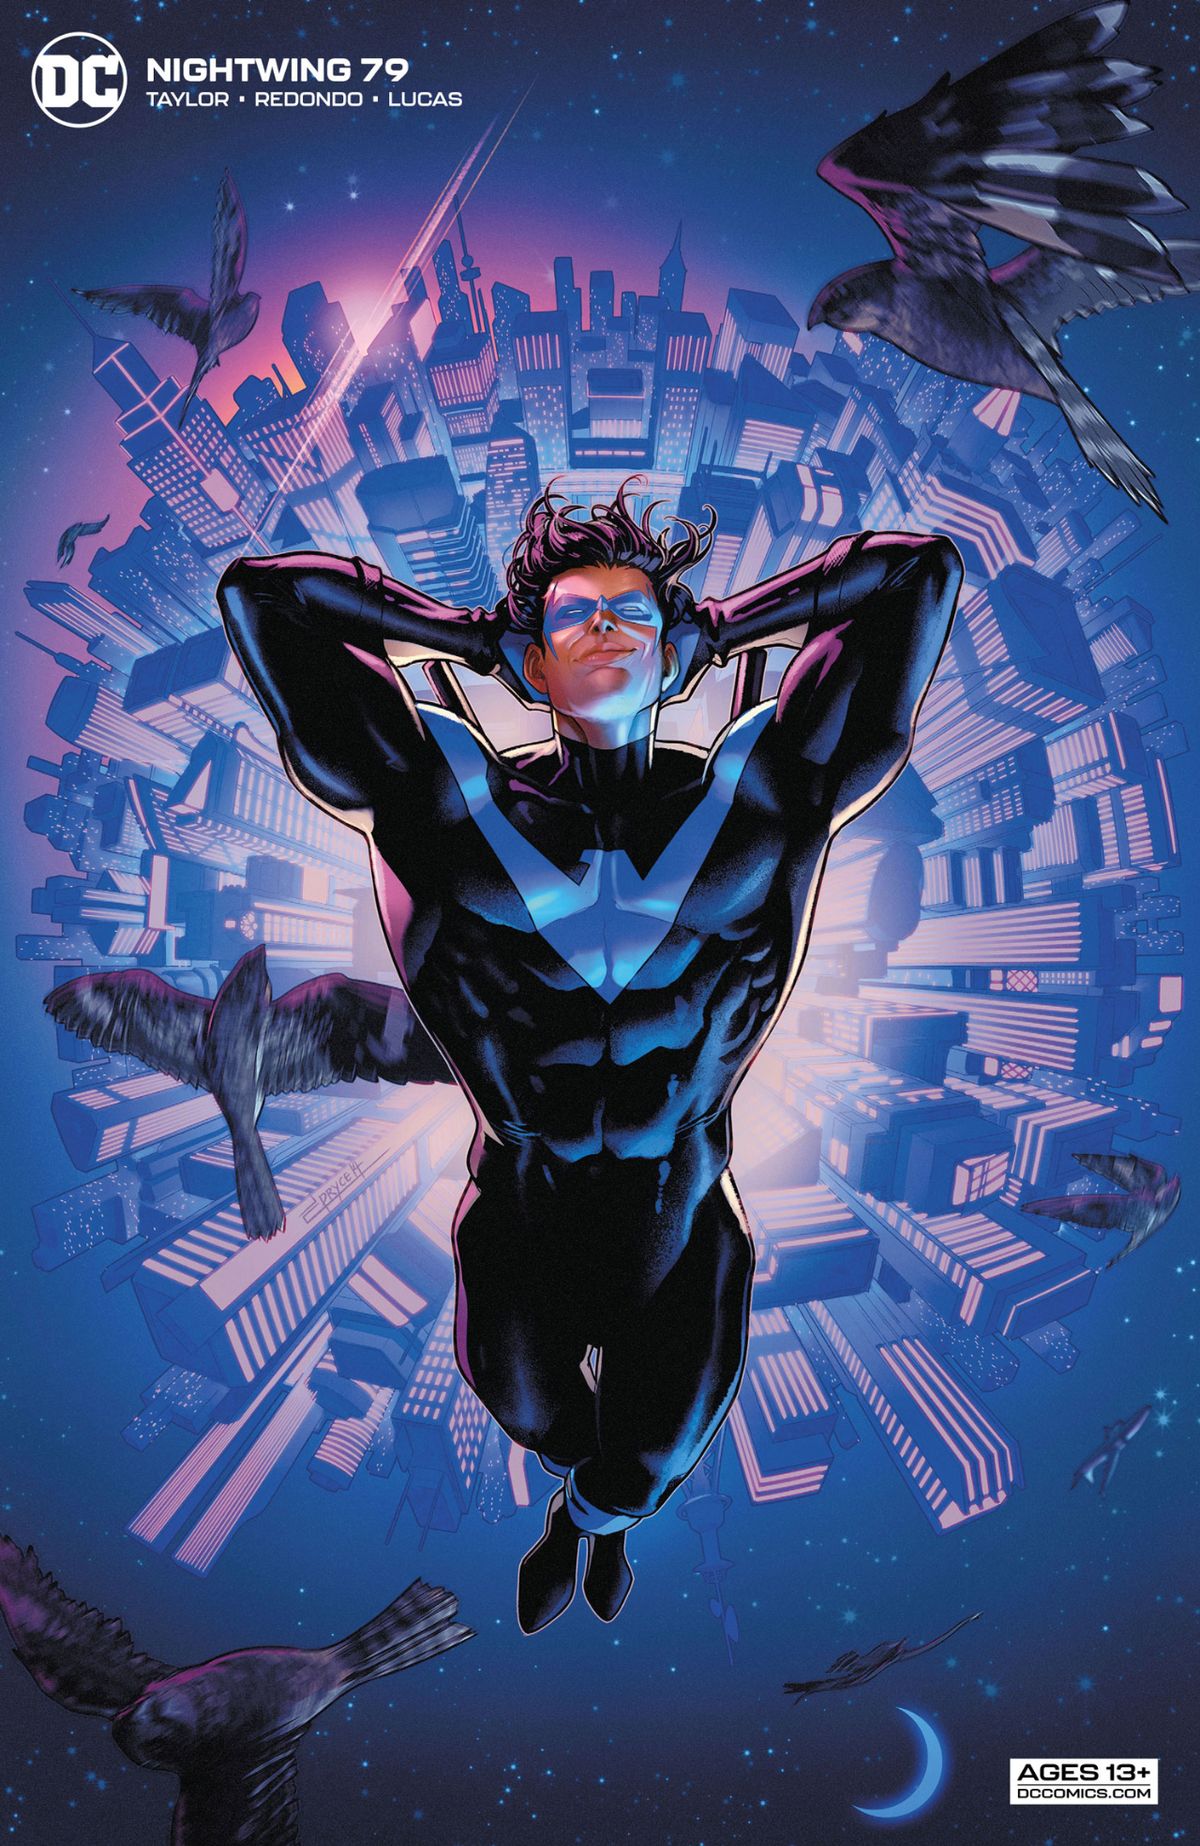 Nightwing #79 explores Dick Grayson's past in this first look preview |  GamesRadar+